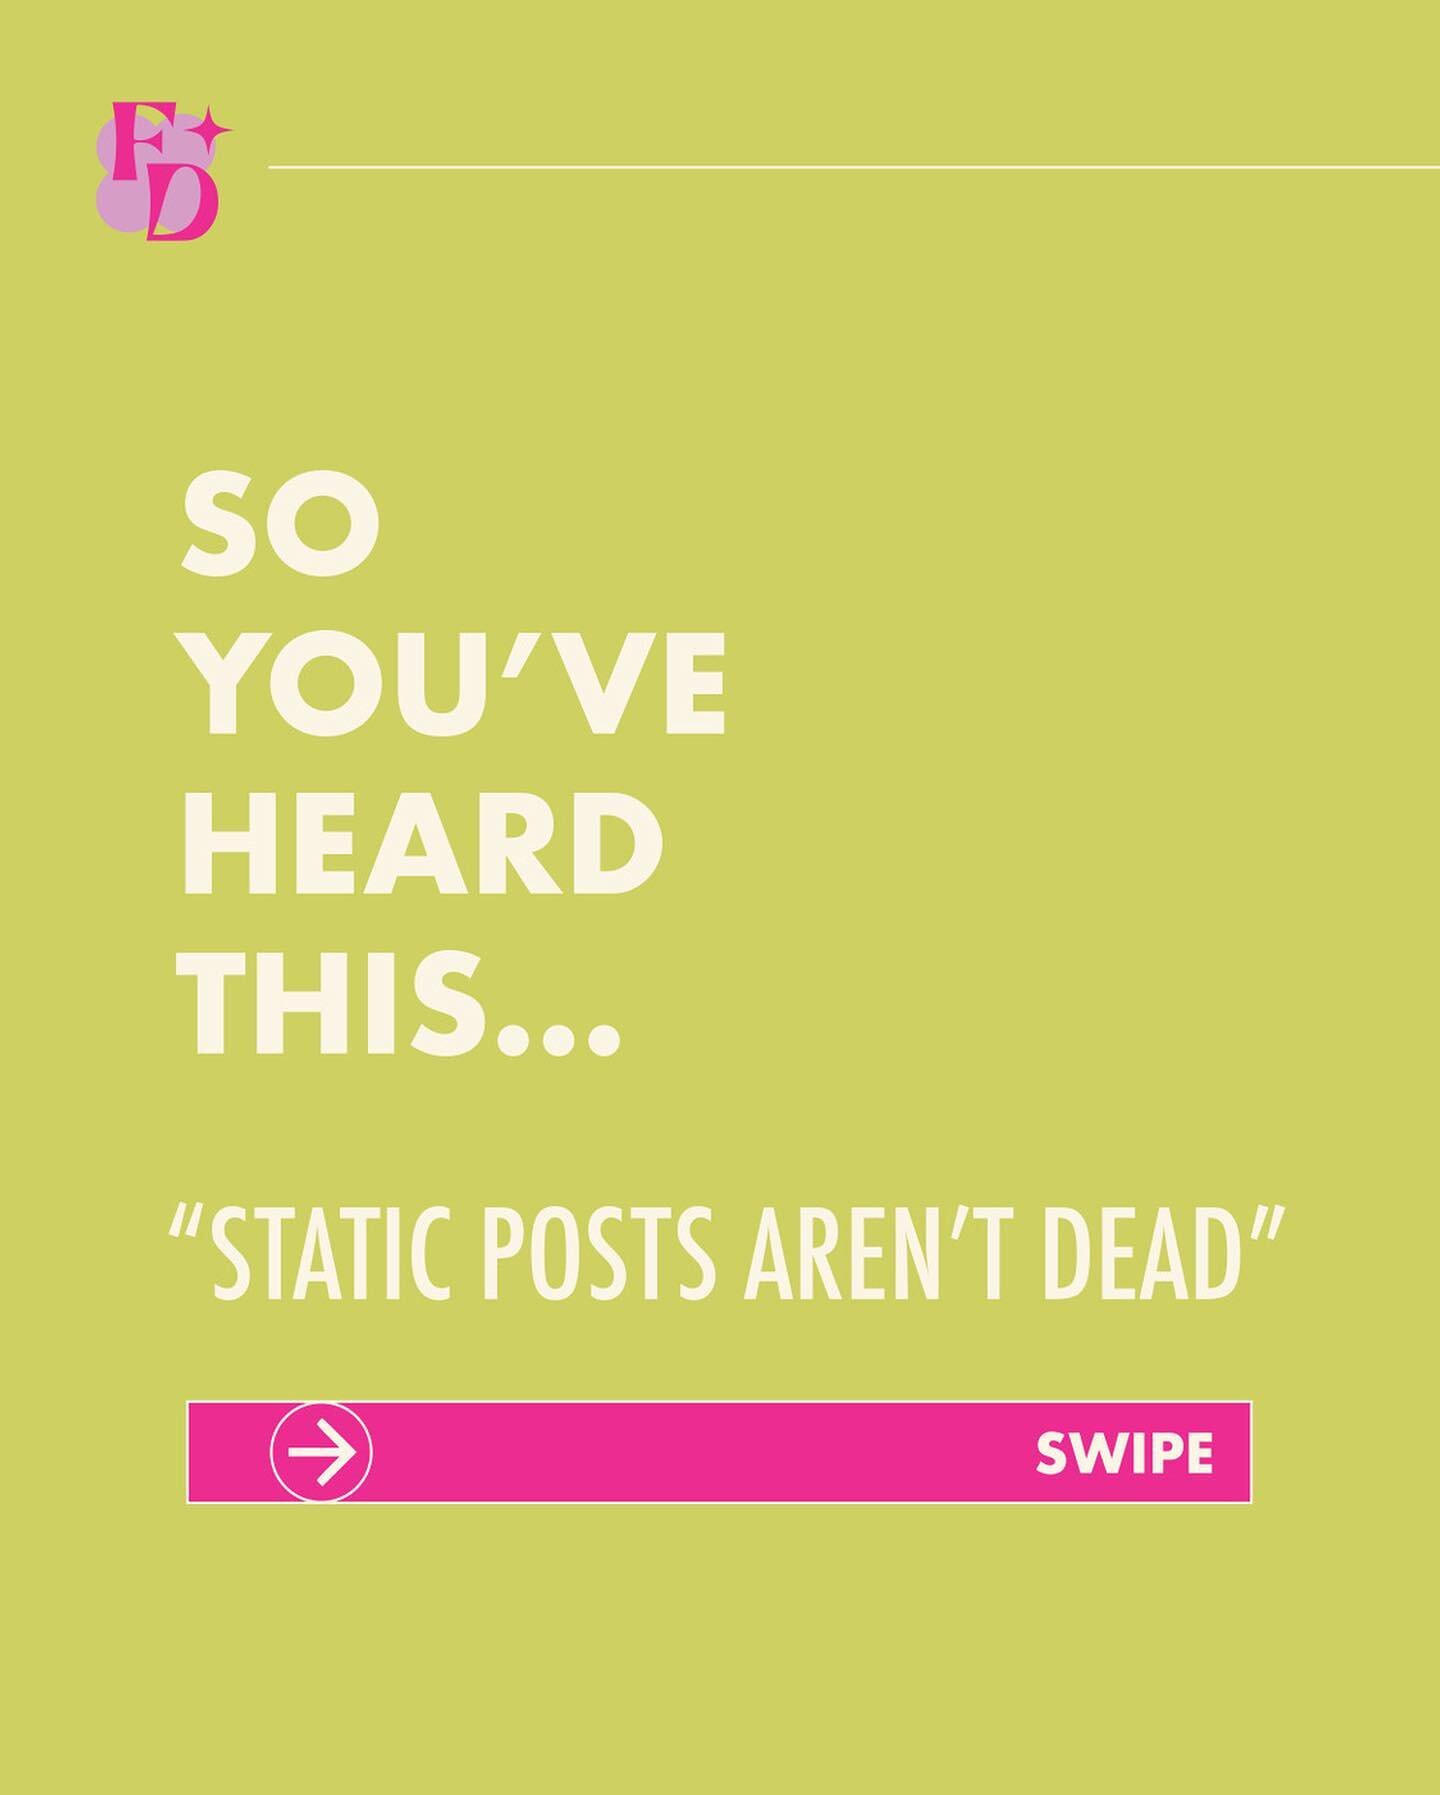 Here&rsquo;s a reminder for you! With Instagram saying they will be pushing static posts as well as video content. Now is the time to make sure your static posts are READABLE - I can&rsquo;t stress enough how important this is 😍
⠀⠀⠀⠀⠀⠀⠀⠀⠀
So swipe t